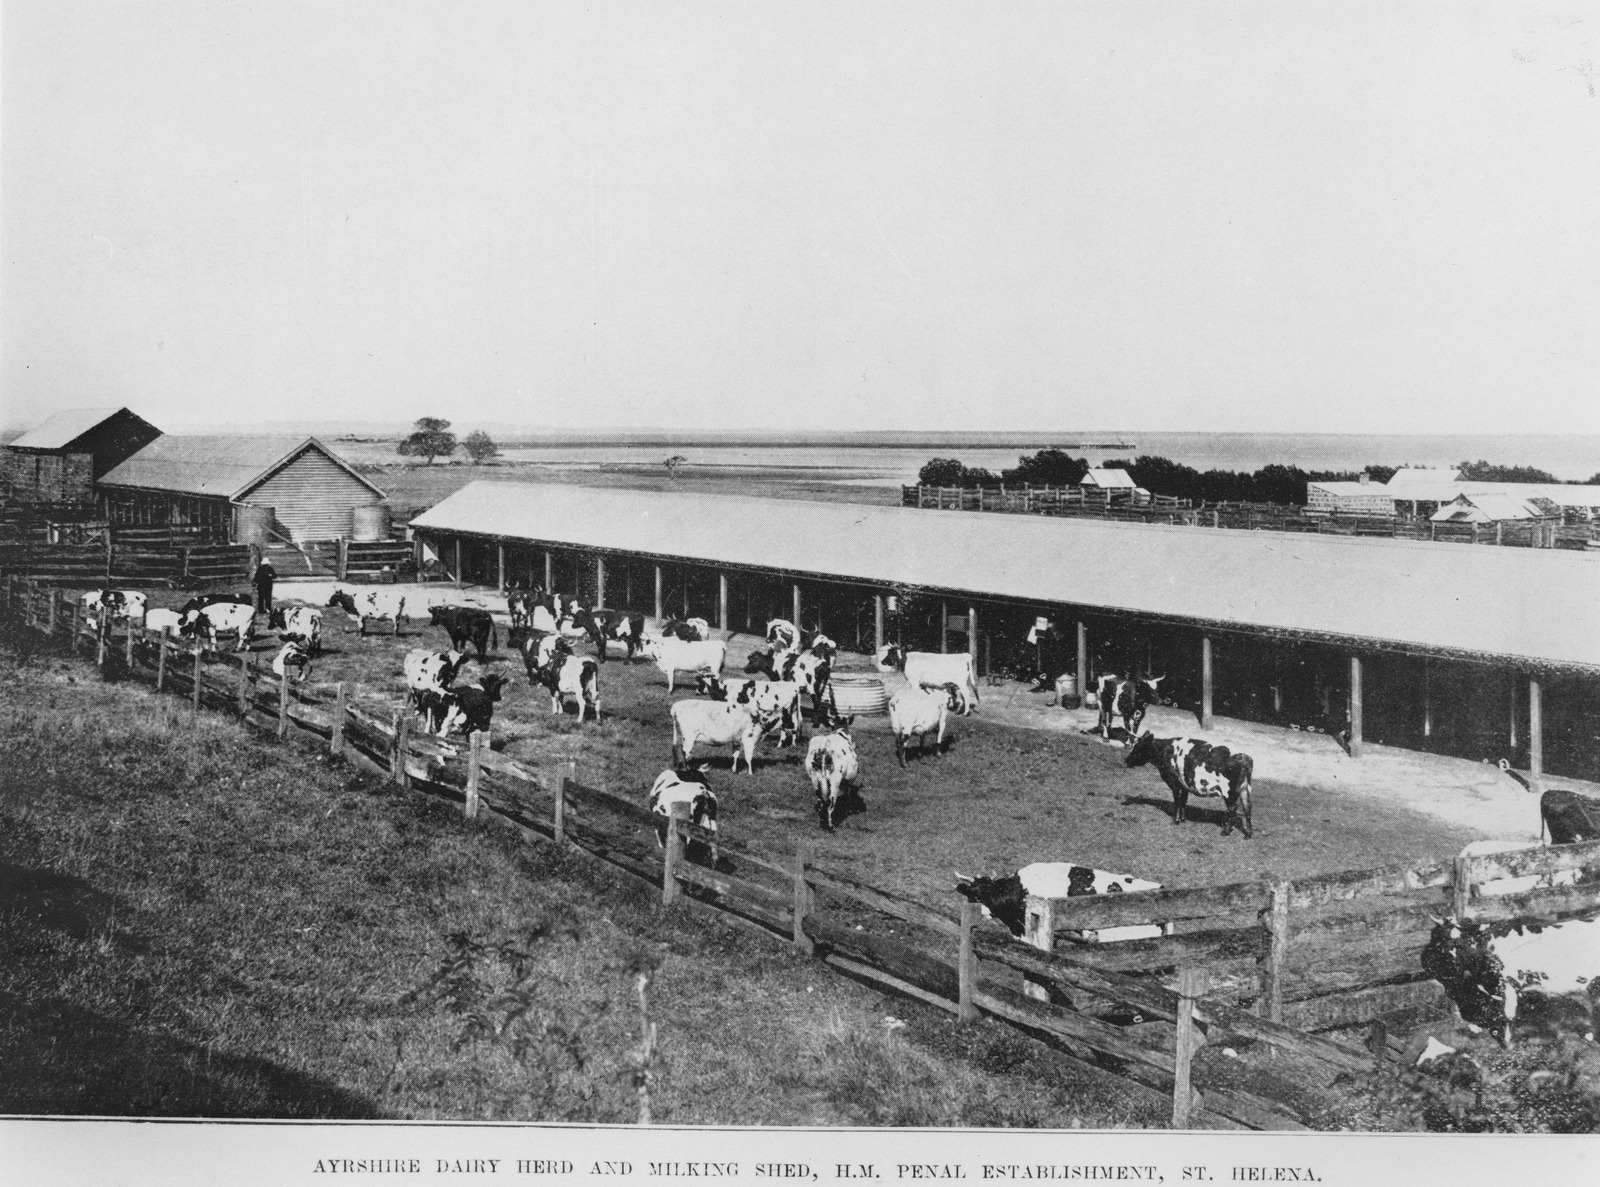 Ayrshire dairy herd and milking shed on St Helena Island, 1910.